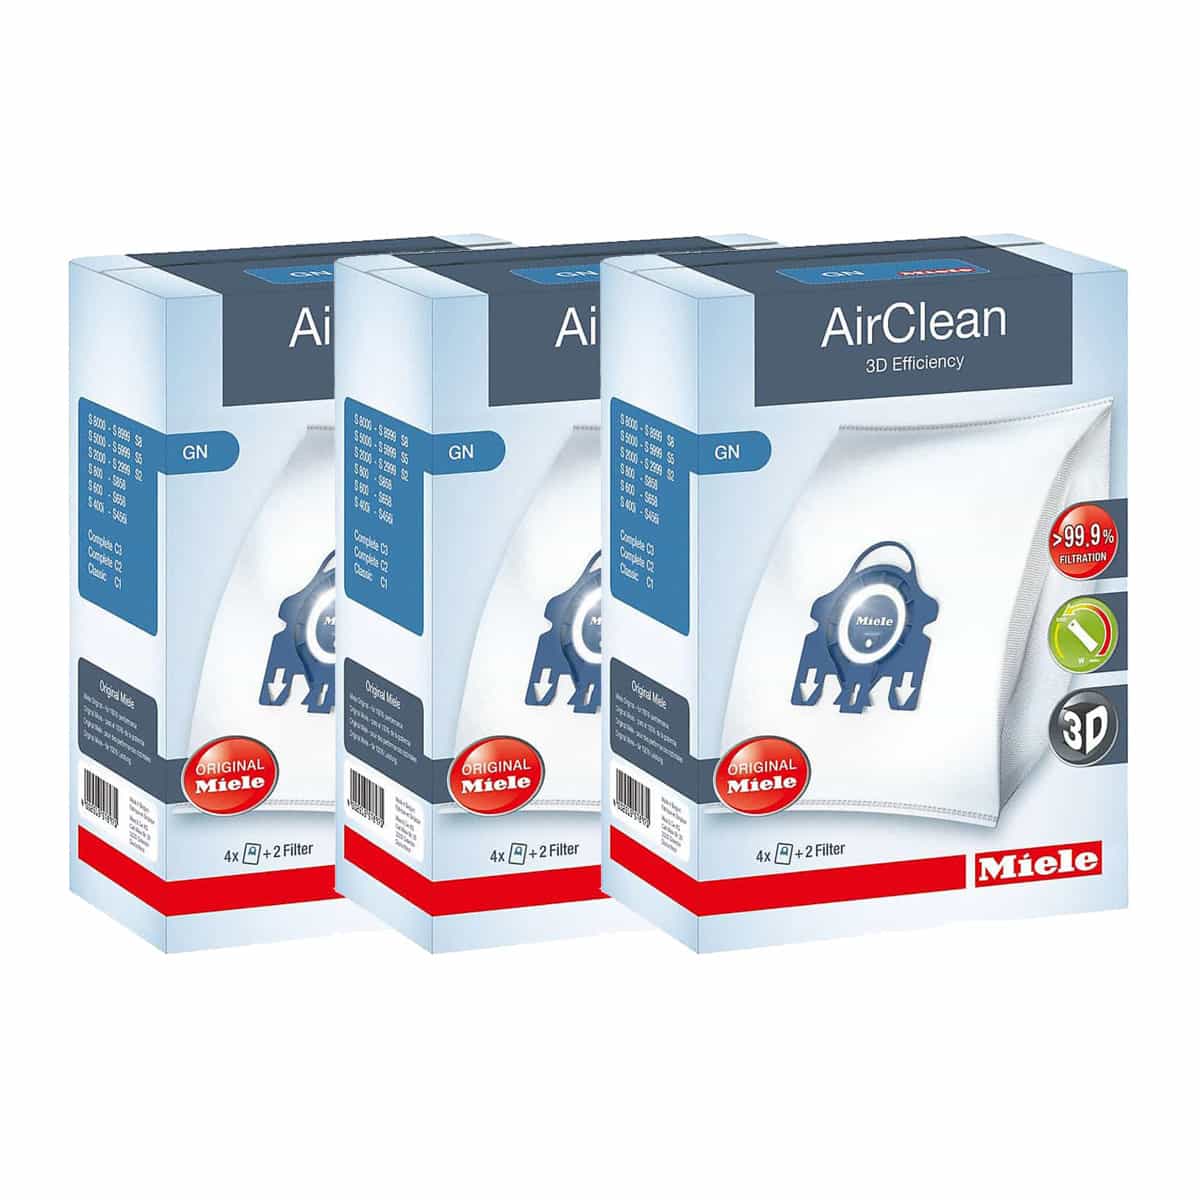  9 Pack Airclean GN 3D Vacuum Cleaner Bags Compatible